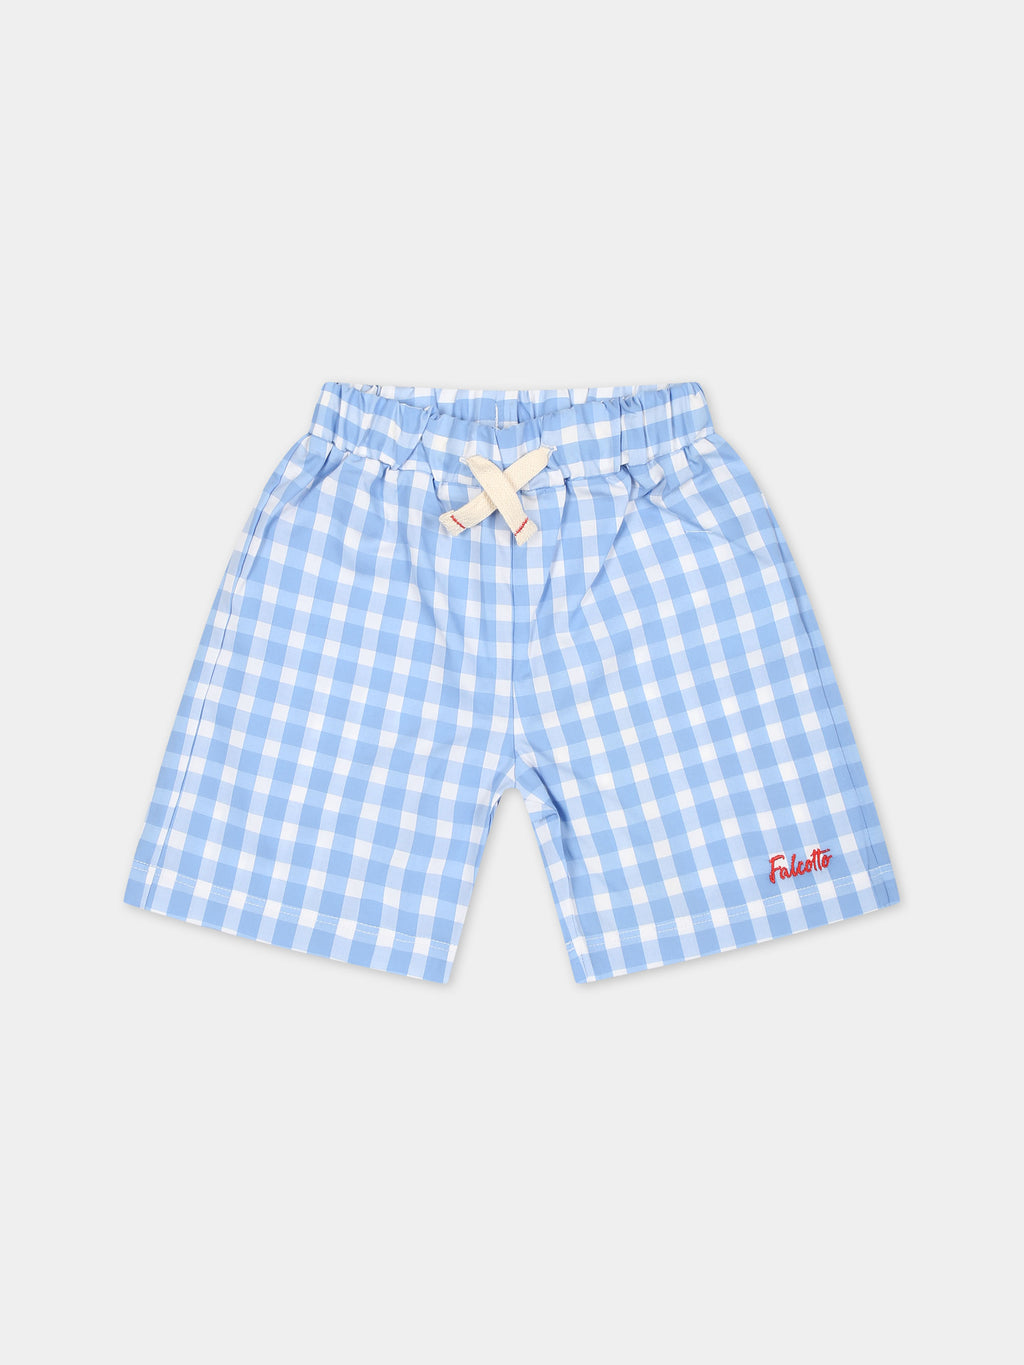 Light blue short for baby boy with logo